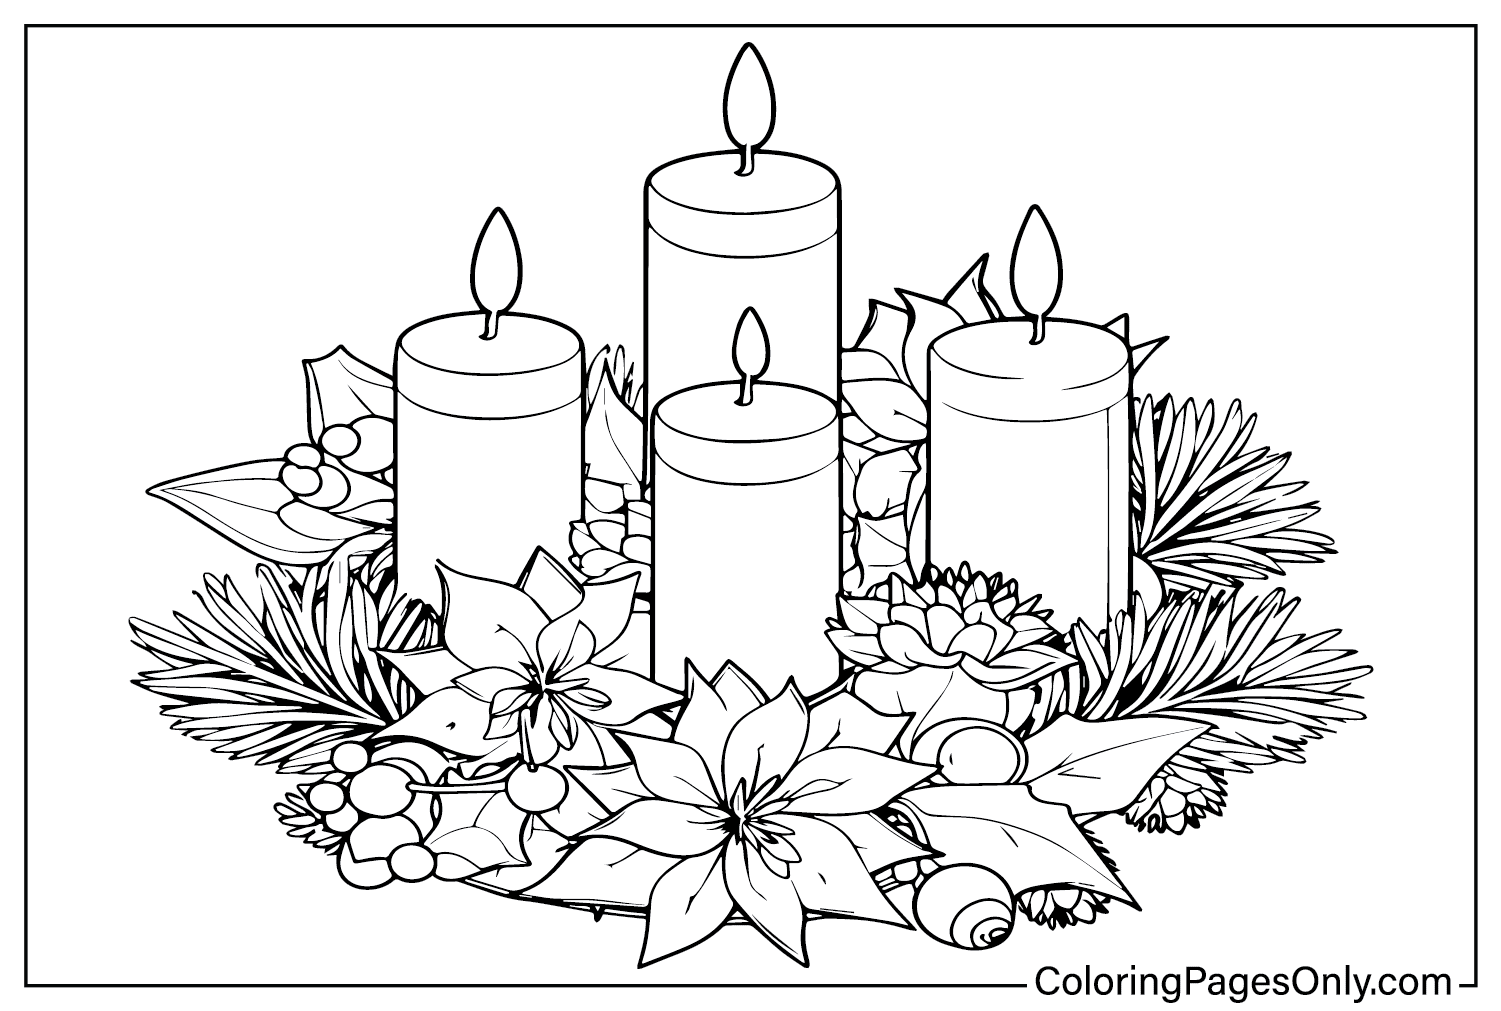 Advent Wreath Coloring Page Free Printable from Advent Wreath